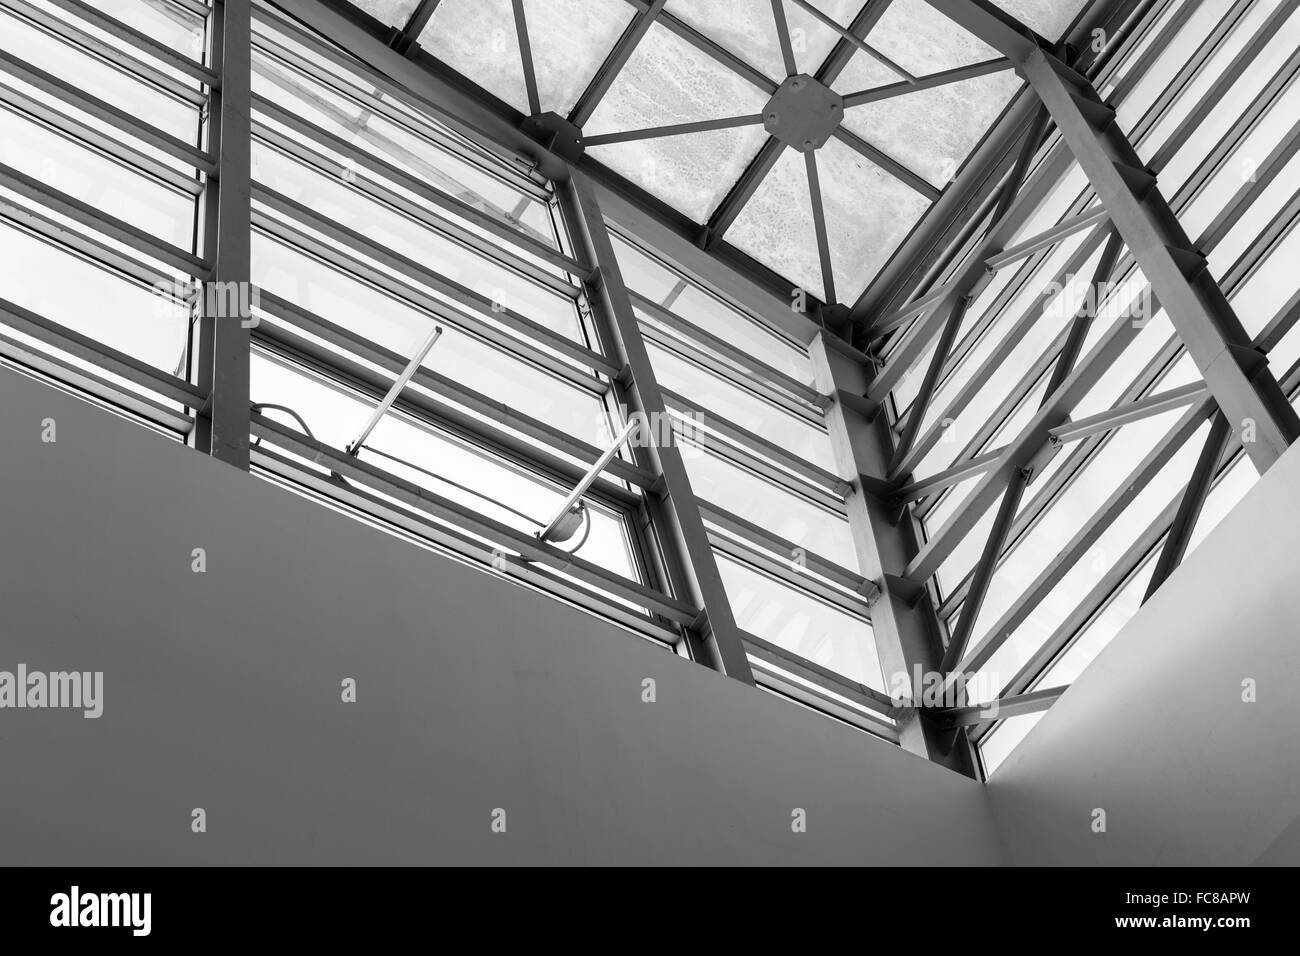 Abstract style roofing detail interior of a modern building with glass panels in black and white Stock Photo